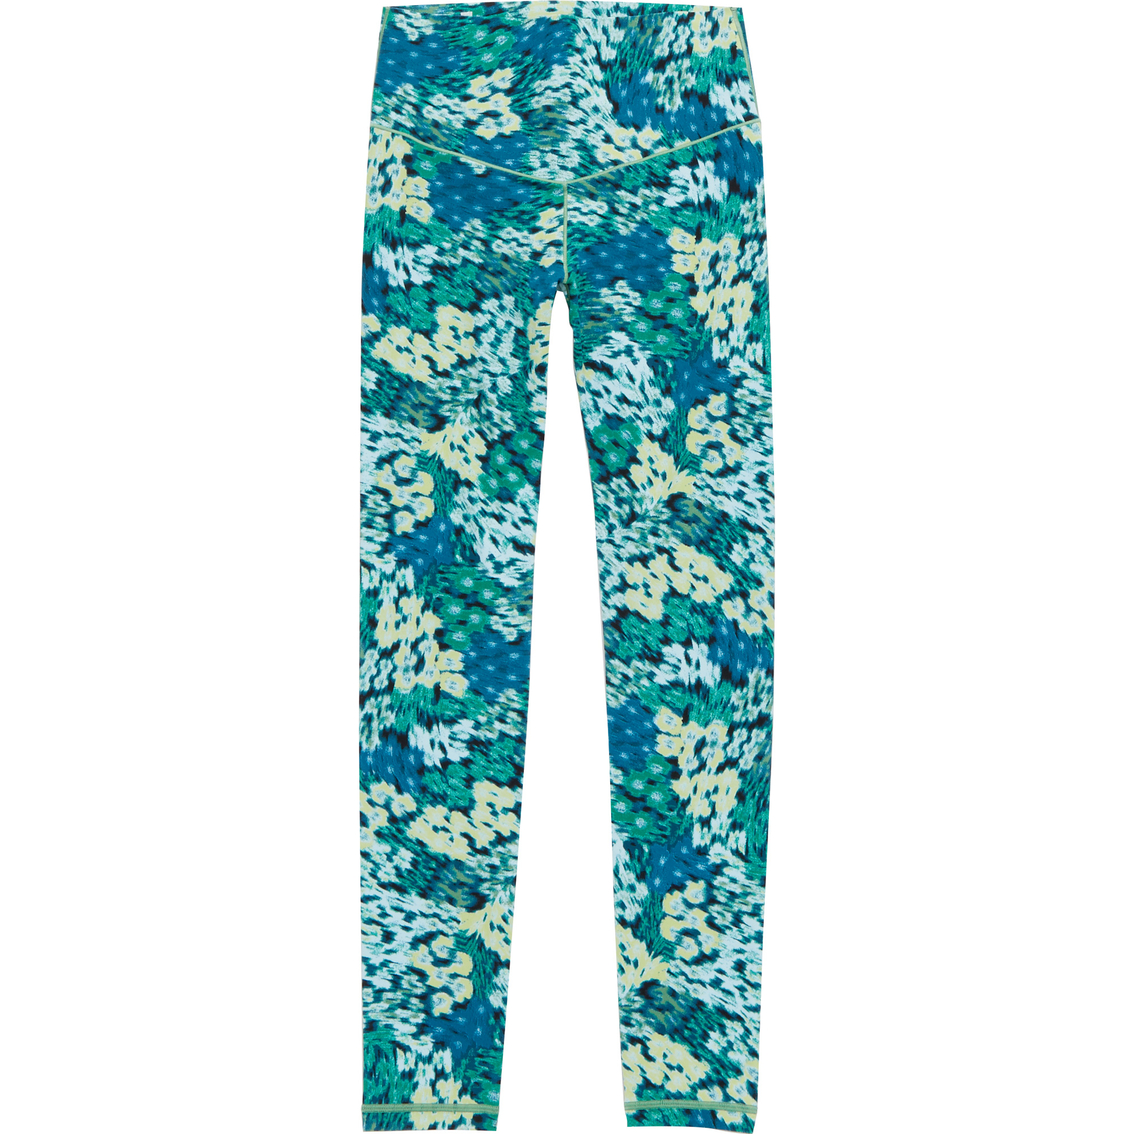 Offline By Aerie Real Me Xtra Hold Up! Leggings